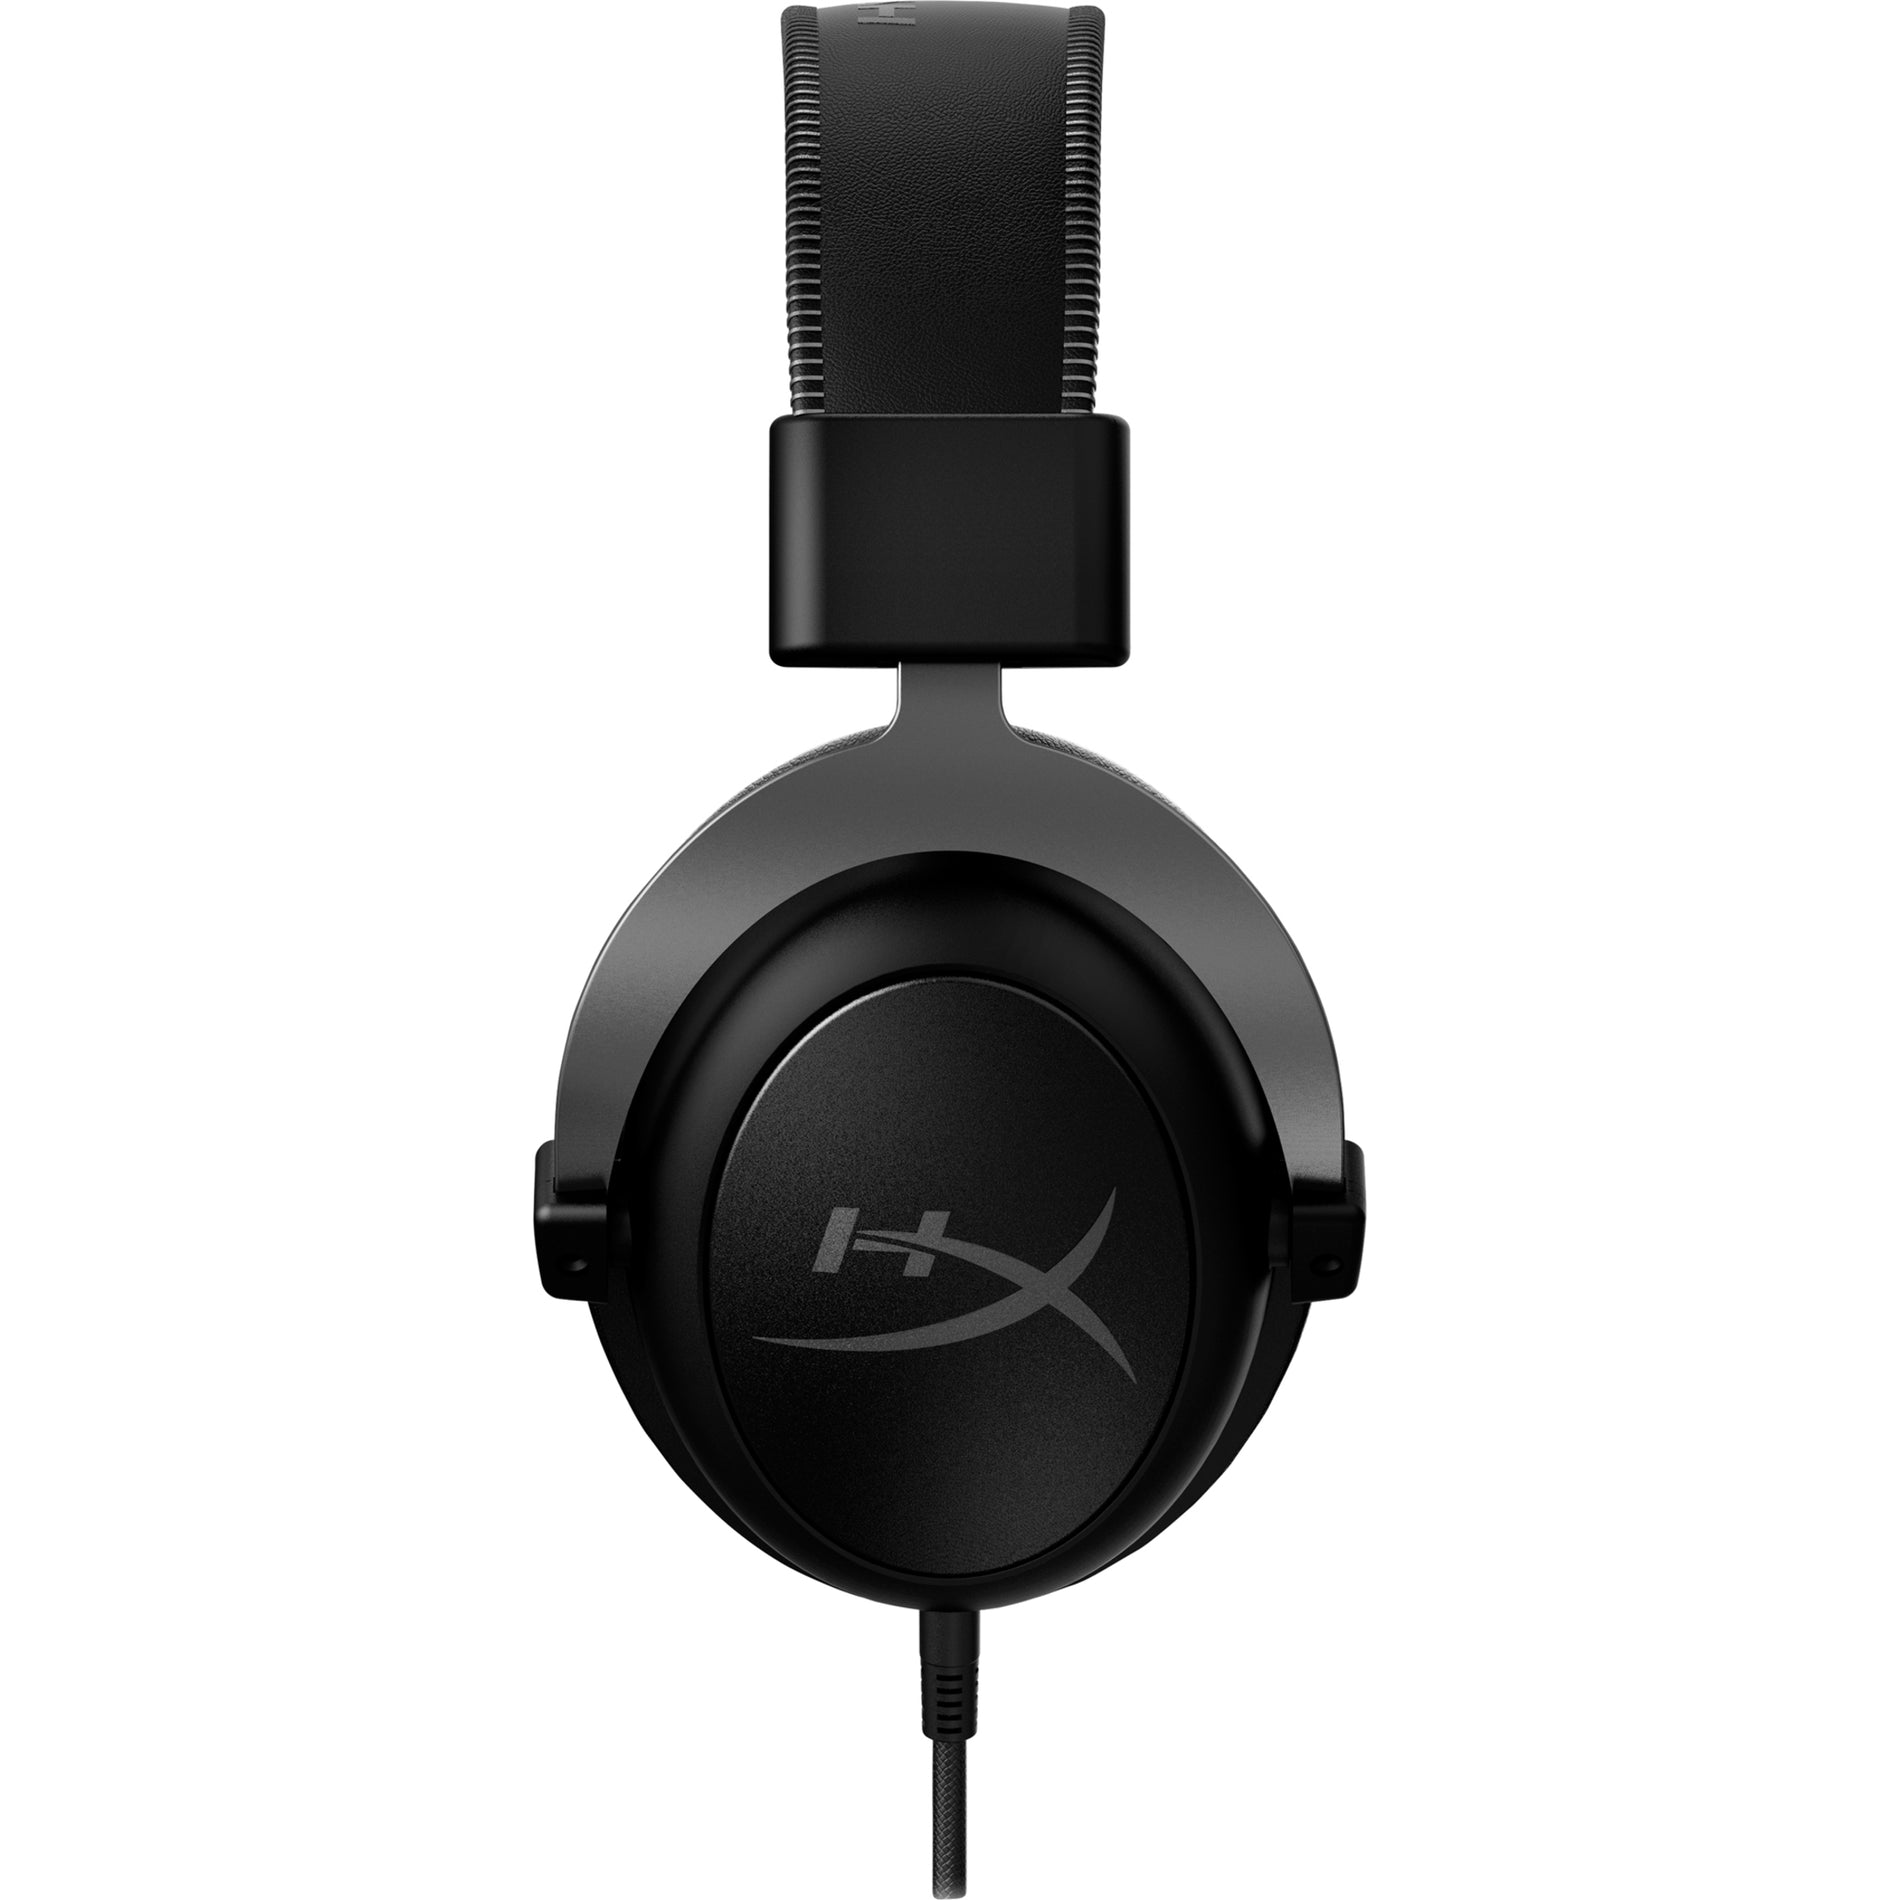 HyperX 4P5L9AA Cloud II Gaming Headset, 7.1 Surround Sound, Noise Cancelling Microphone